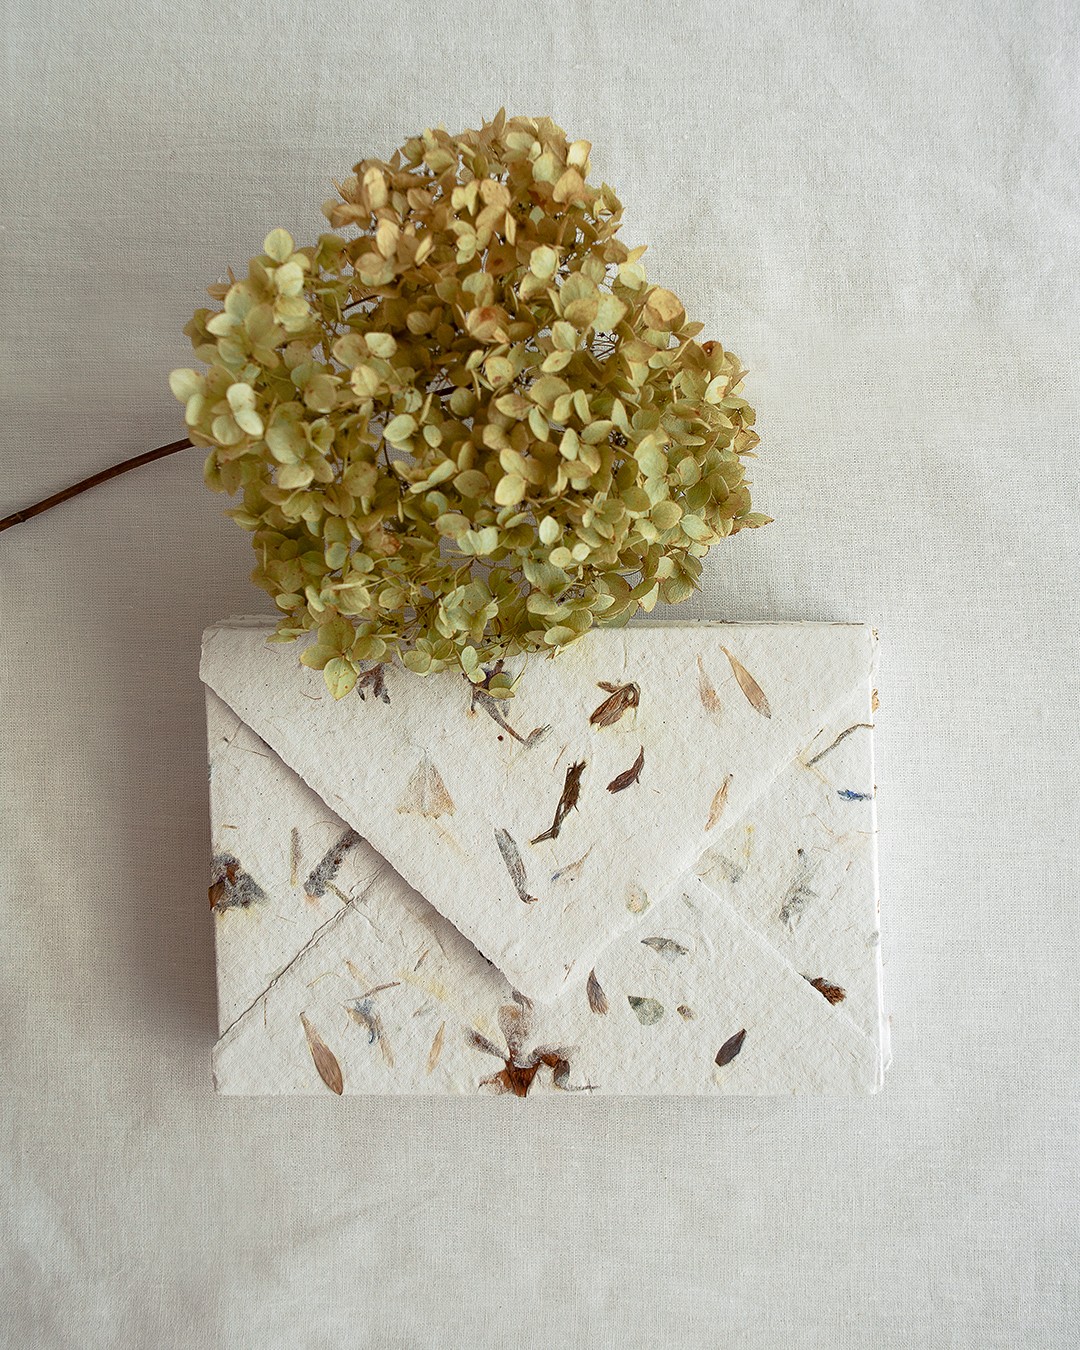 Set of 3 handmade envelopes from recycled paper with mix of flowers. Deckle Edge Paper. C6 / 11x16 cm / 4,33x6,29 inch